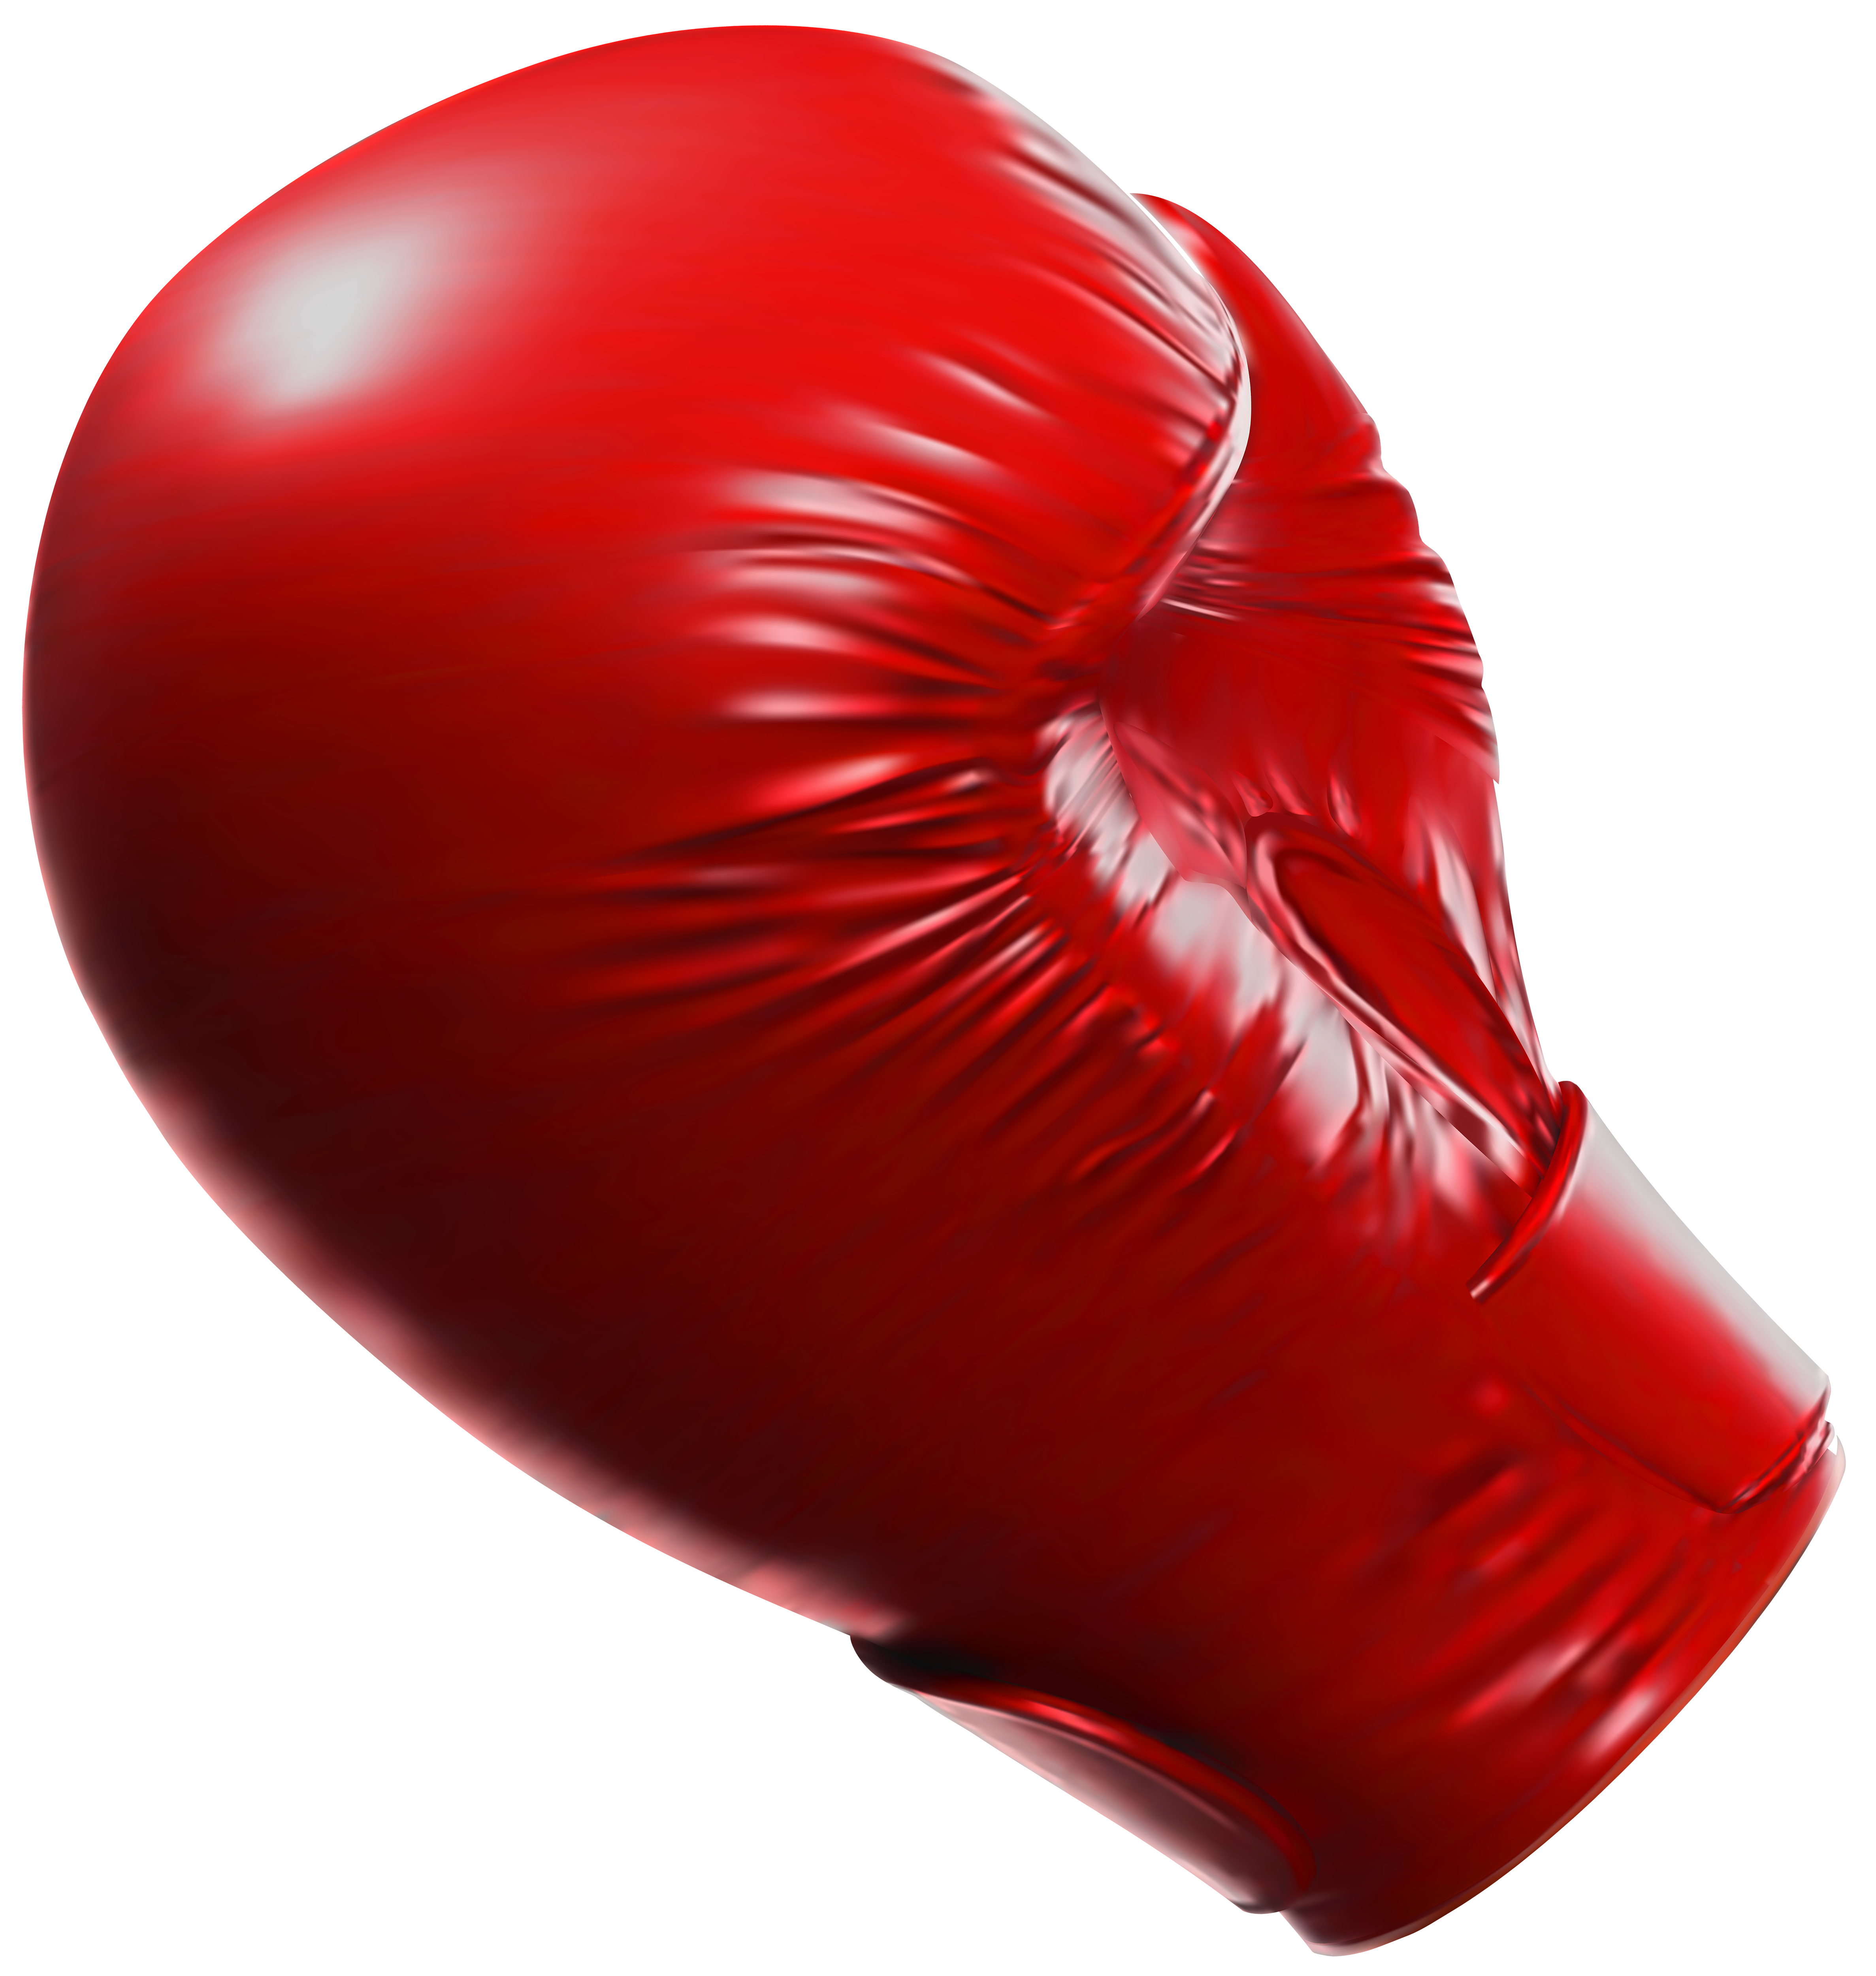 boxing png